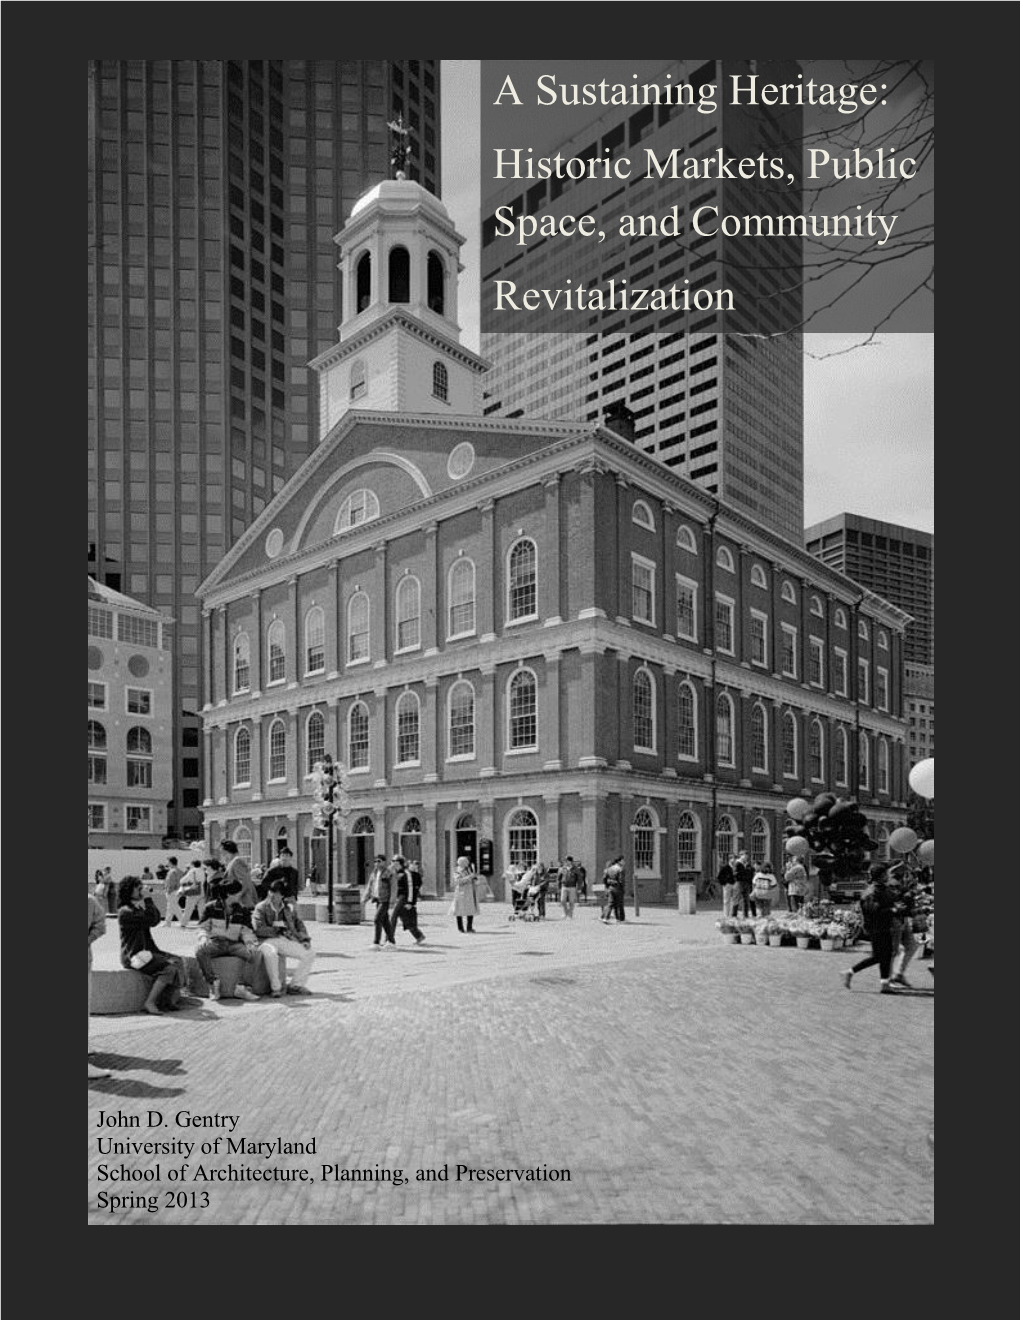 A Sustaining Heritage: Historic Markets, Public Space, and Community Revitalization